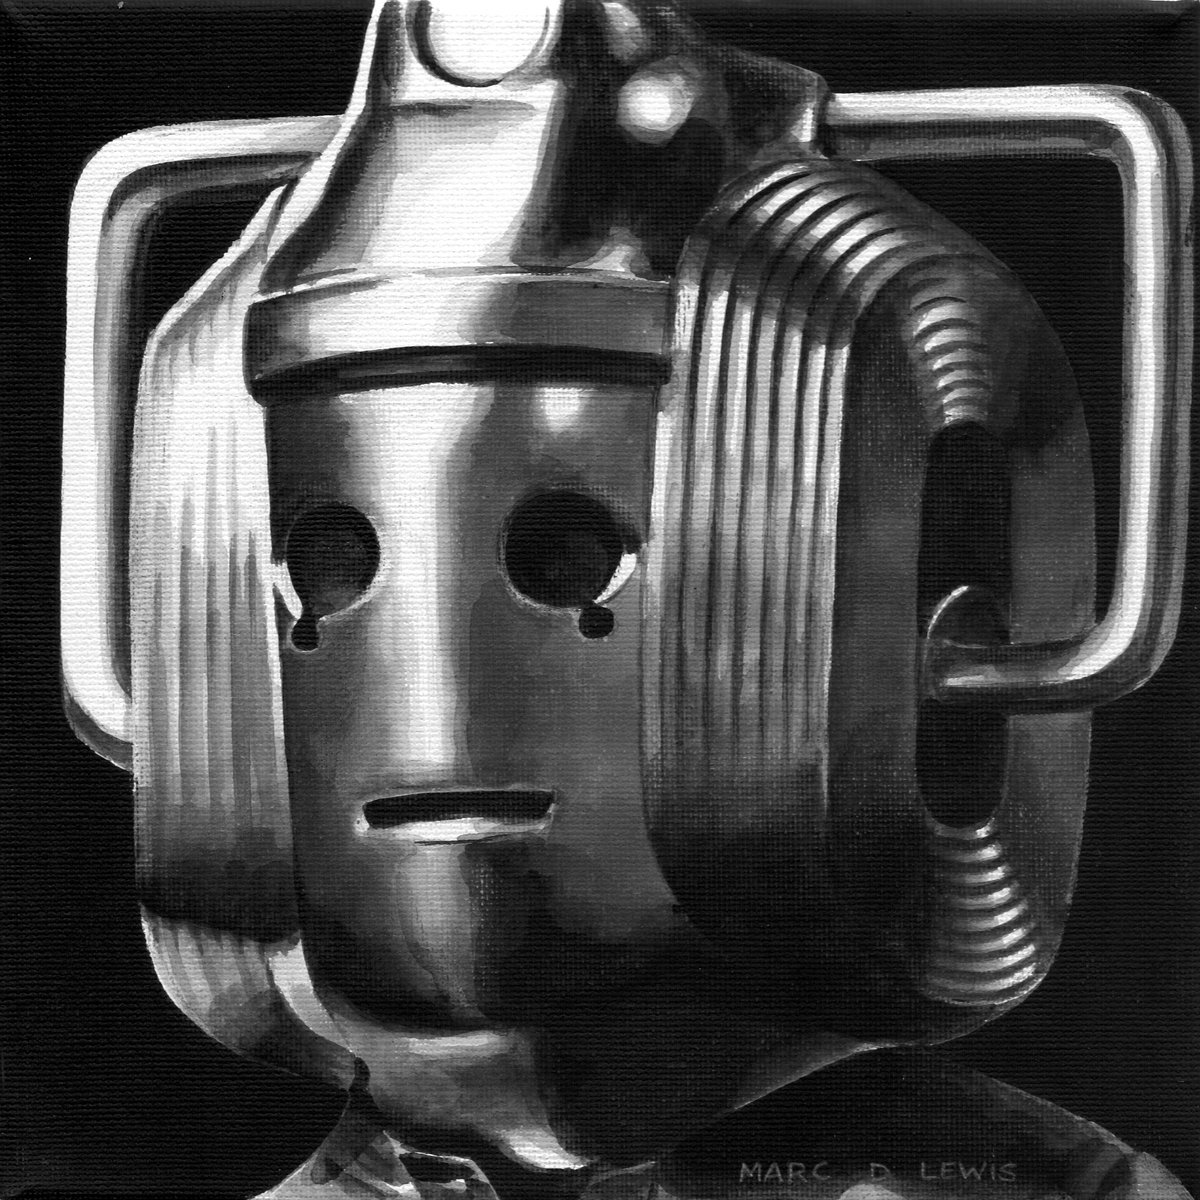 'Do not resist. You will obey instructions. Obey or you will be destroyed.' 🤖 #DoctorWho #DrWho #DWfanart #Cybermen #TheInvasion #CanvasArt #painting #illustration #art